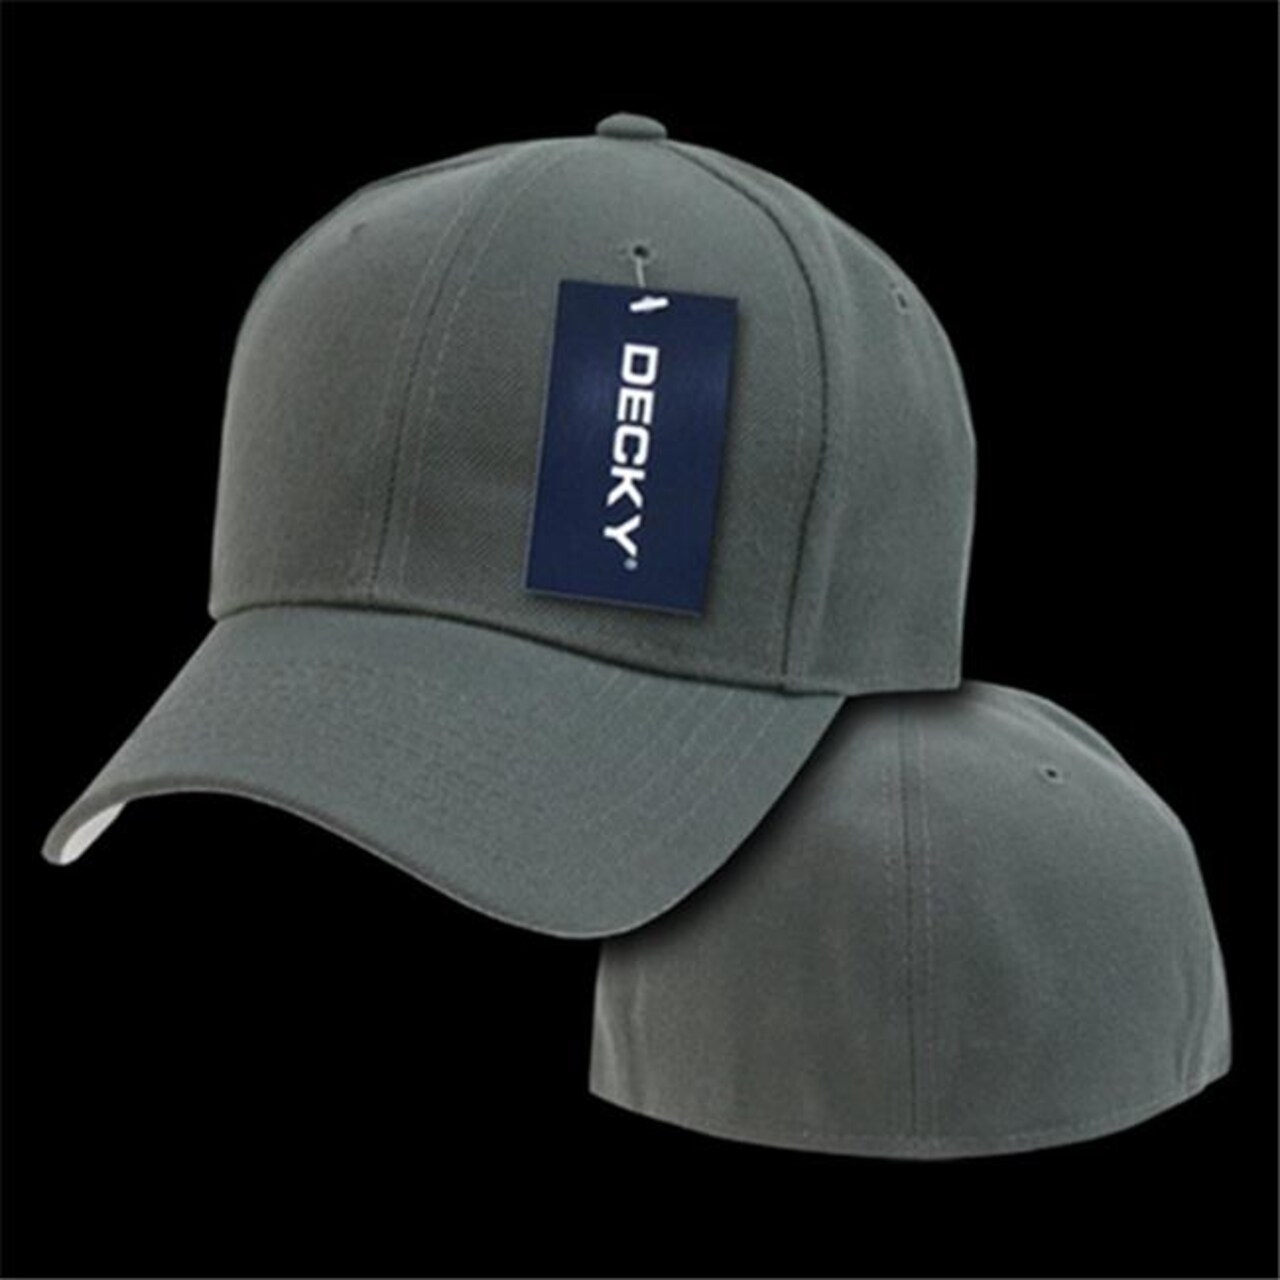 Decky 402-PL-CHA-21 Fitted Cap- Charcoal - 802- Size - 6.75